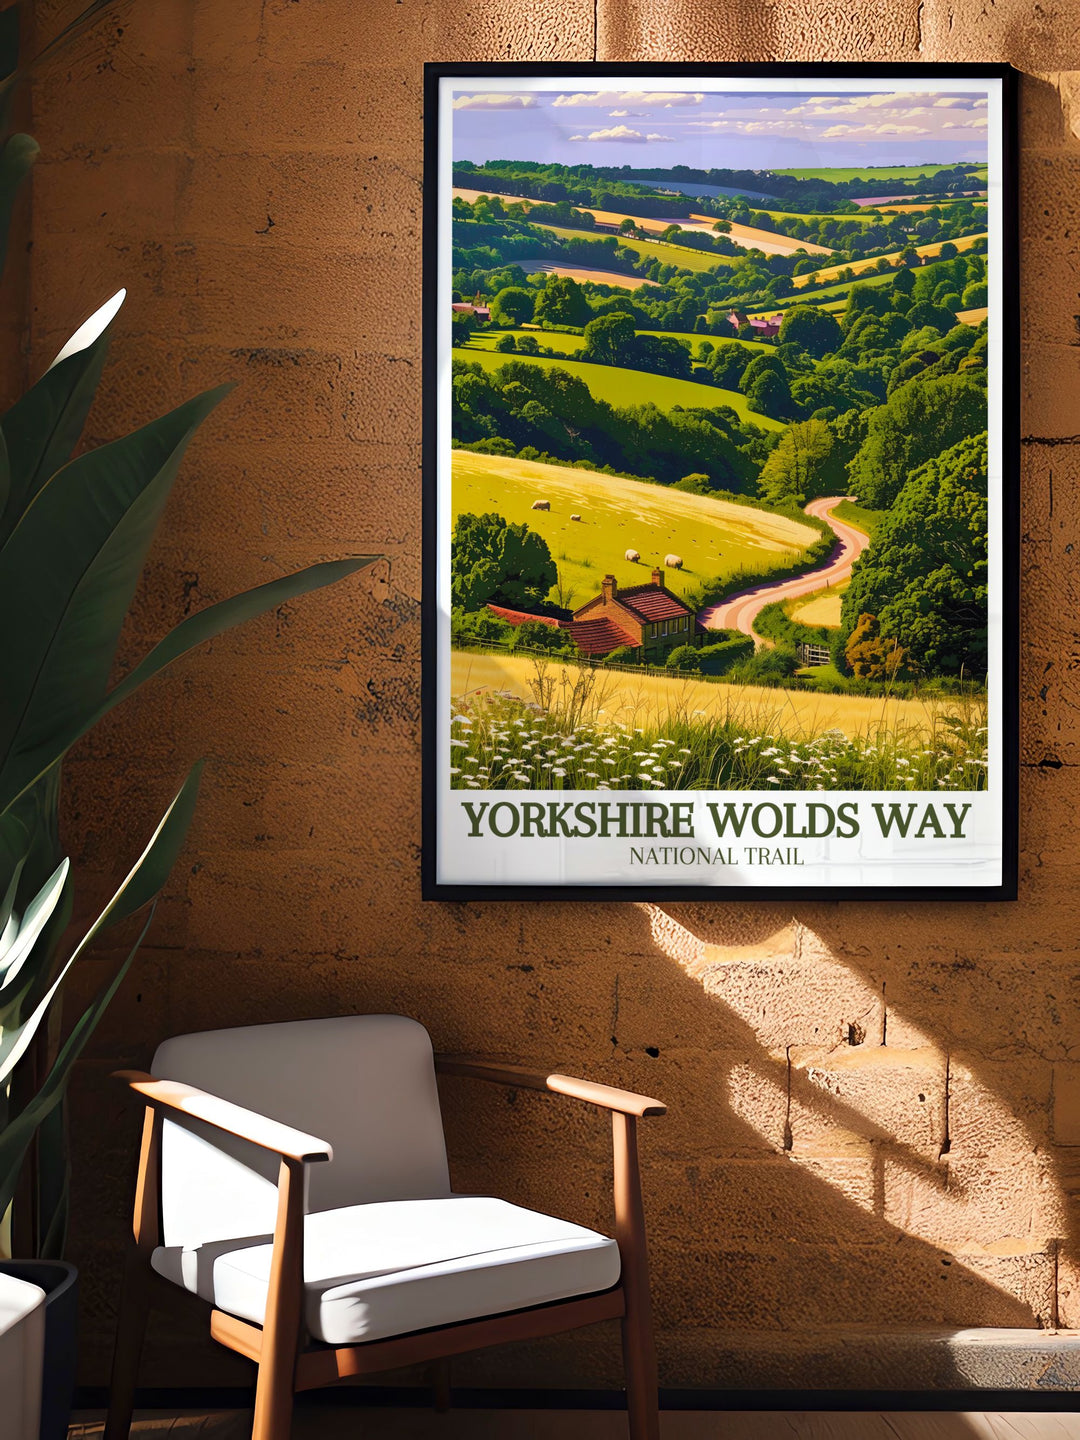 Captivating gallery wall art of the Yorkshire Wolds Way, showcasing the trails rolling hills, lush landscapes, and charming villages. This piece adds a touch of natural elegance and tranquility to your home or office, celebrating one of the UKs most scenic trails.